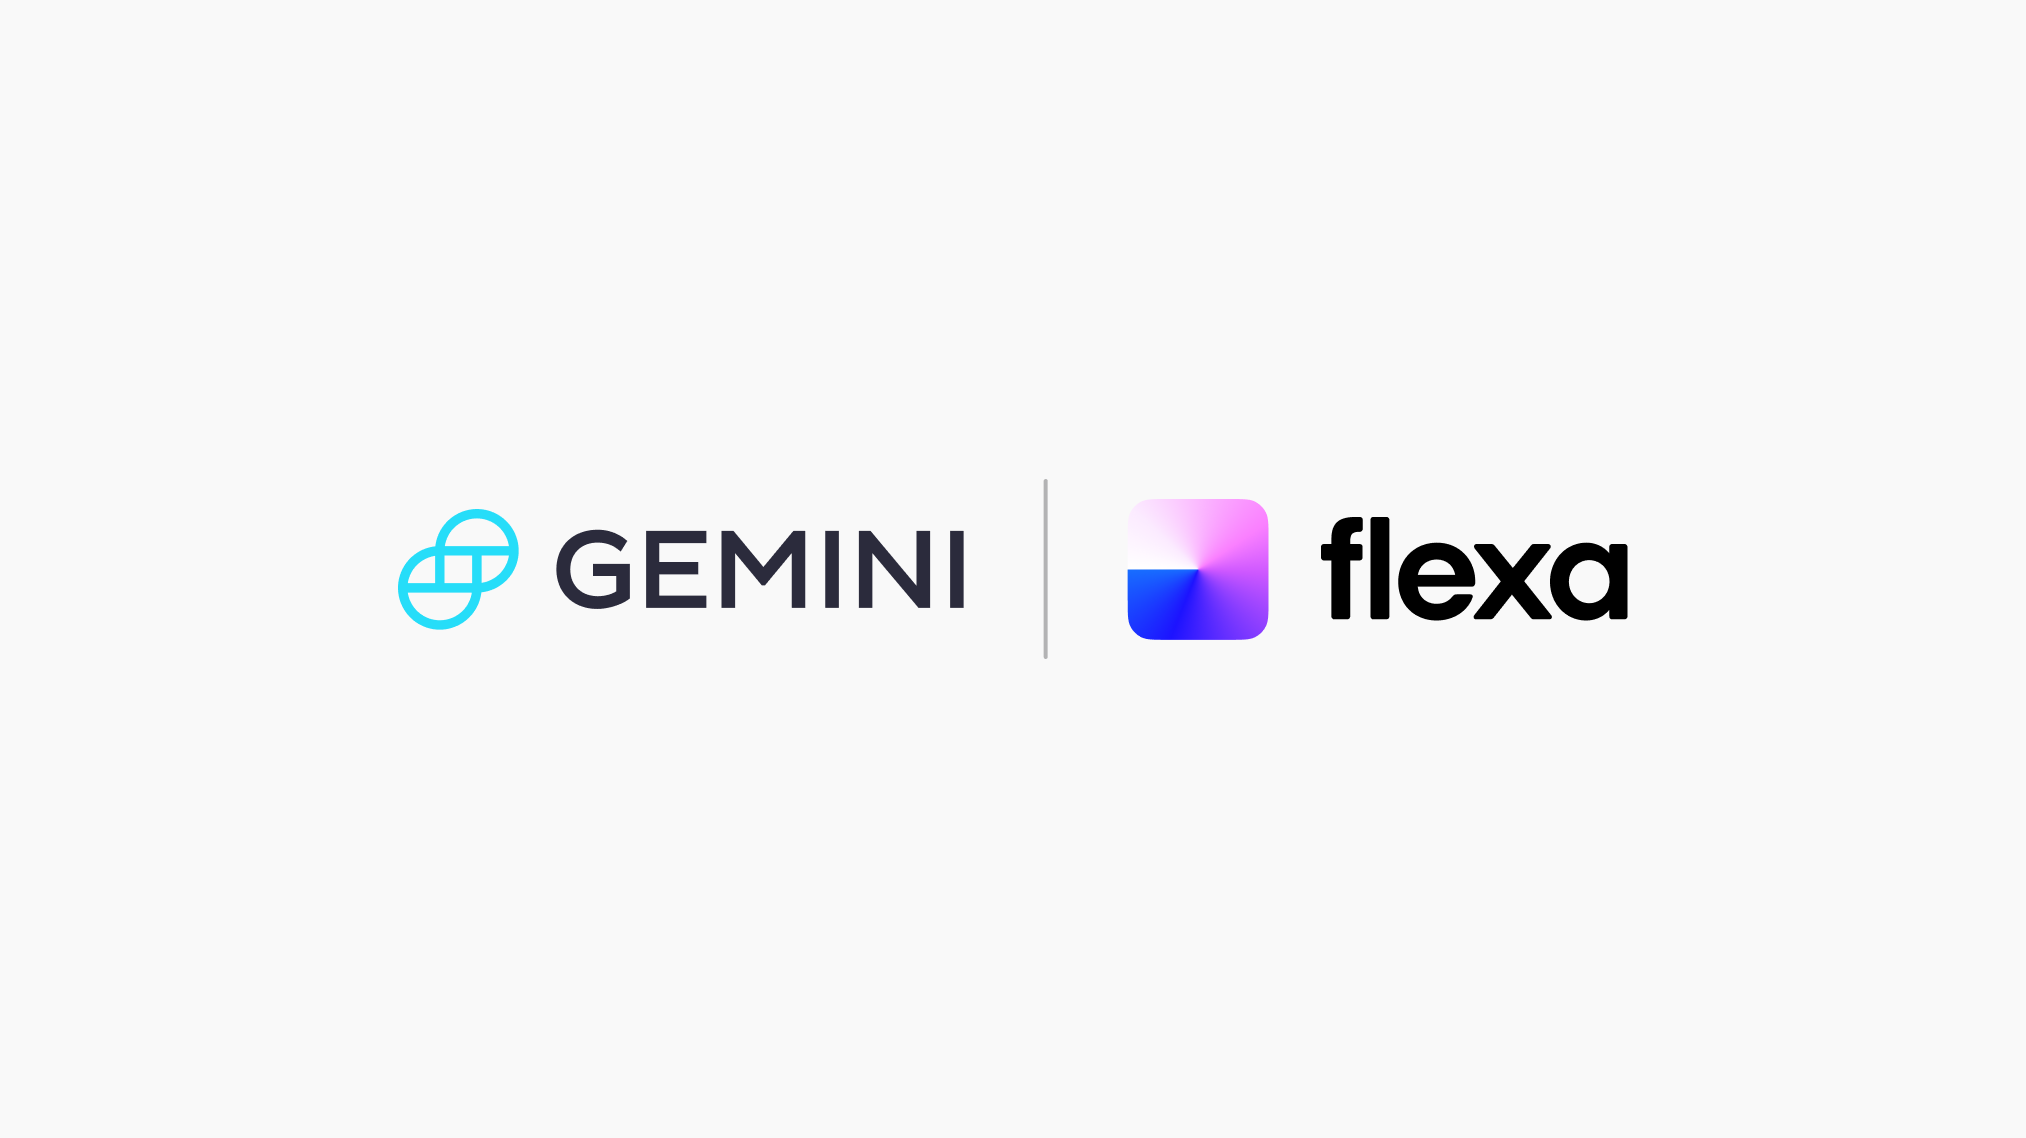 Flexa and Gemini Partner to Make it Easy to Use Cryptocurrency | Gemini